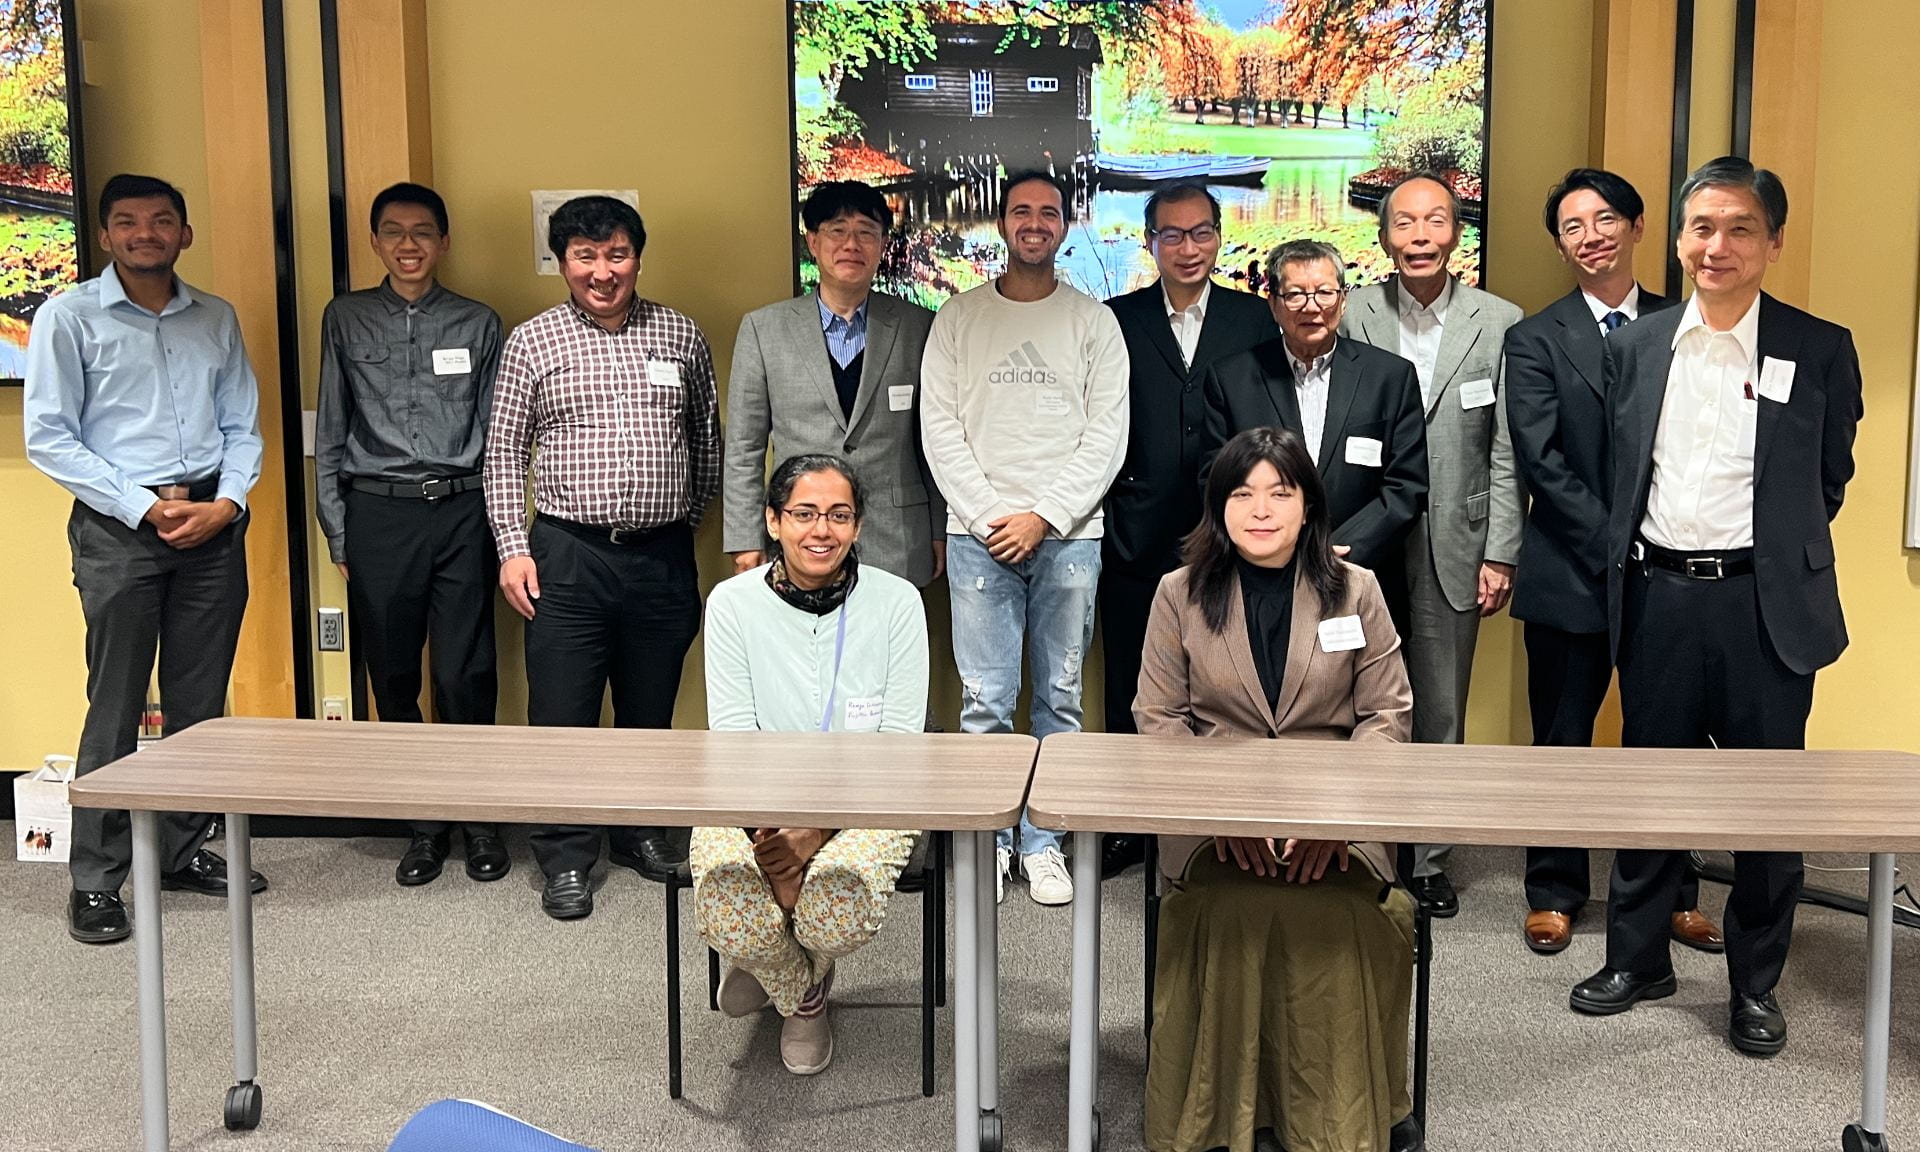 Attendees at the workshop on “Human-Machine Teaming” and “Beneficial AI Systems”